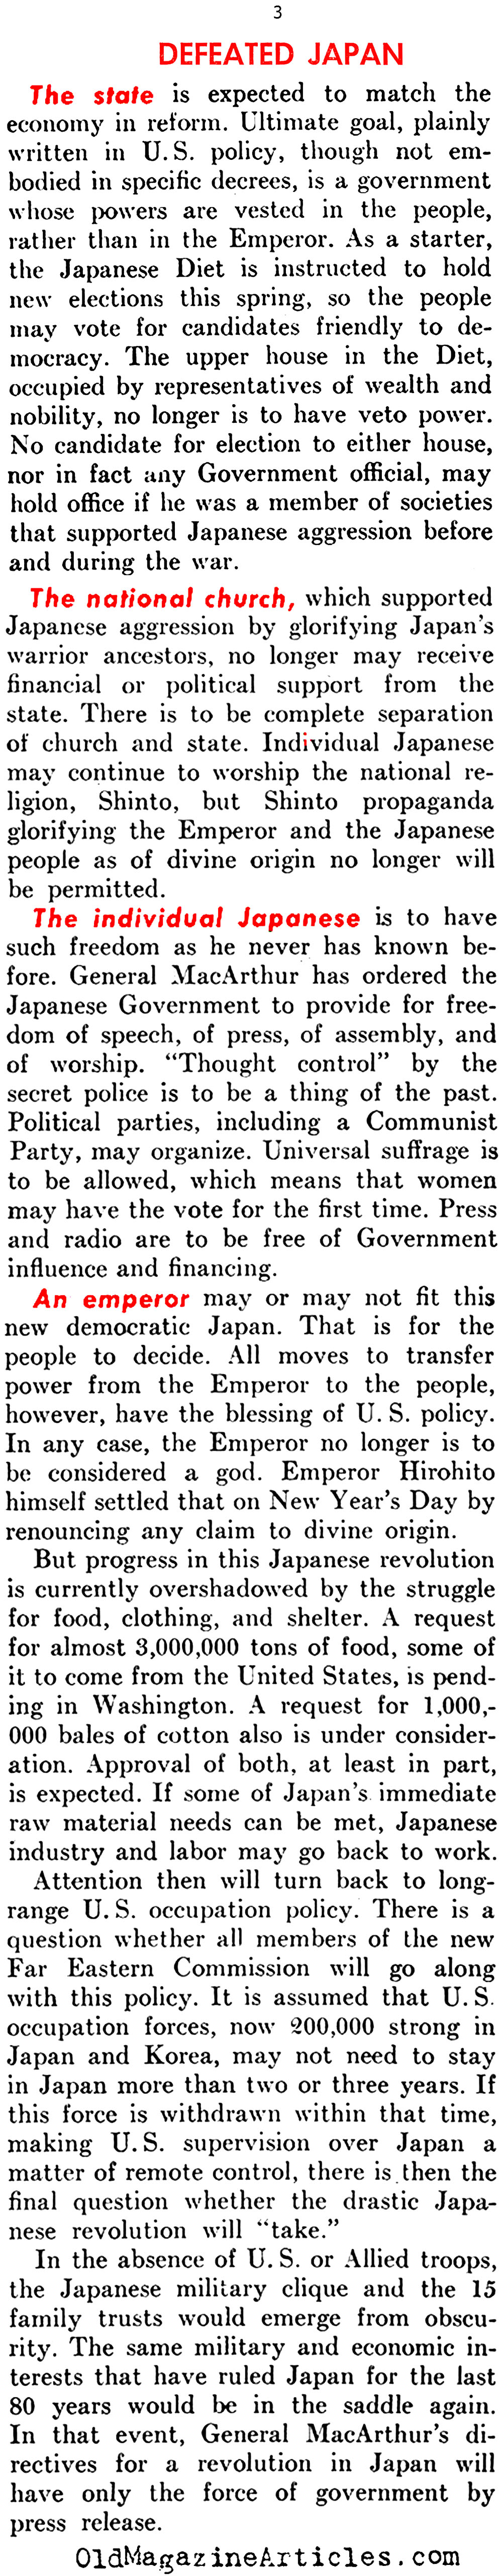 Reforms in Post-Fascist Japan (United States News, 1946)